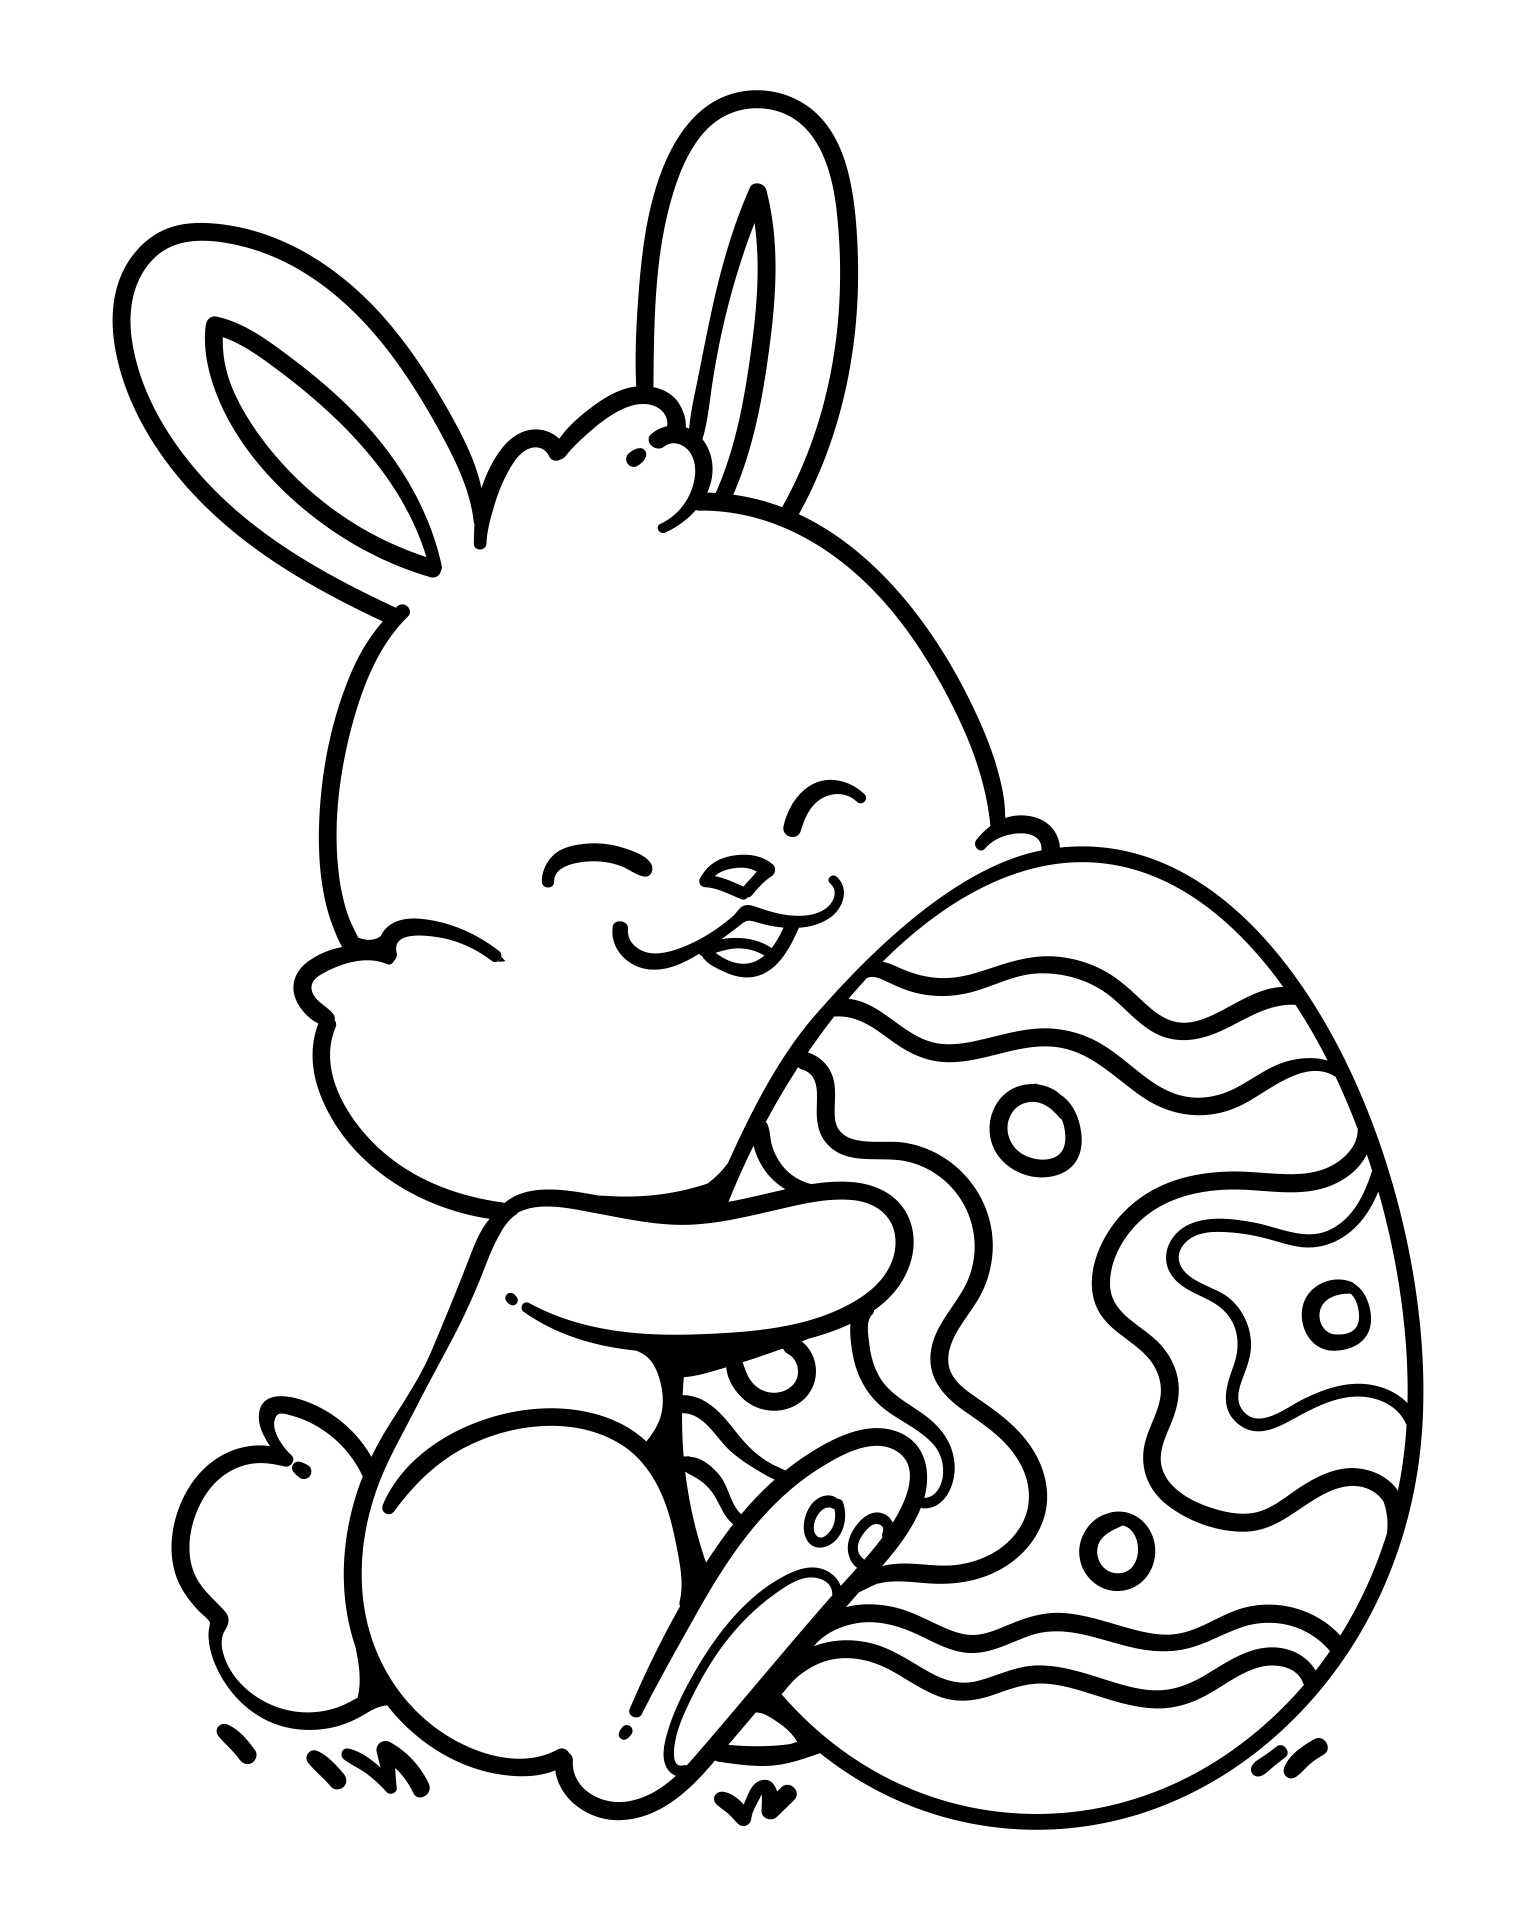 Printable Cute Bunny Holding Easter Egg Coloring Pages